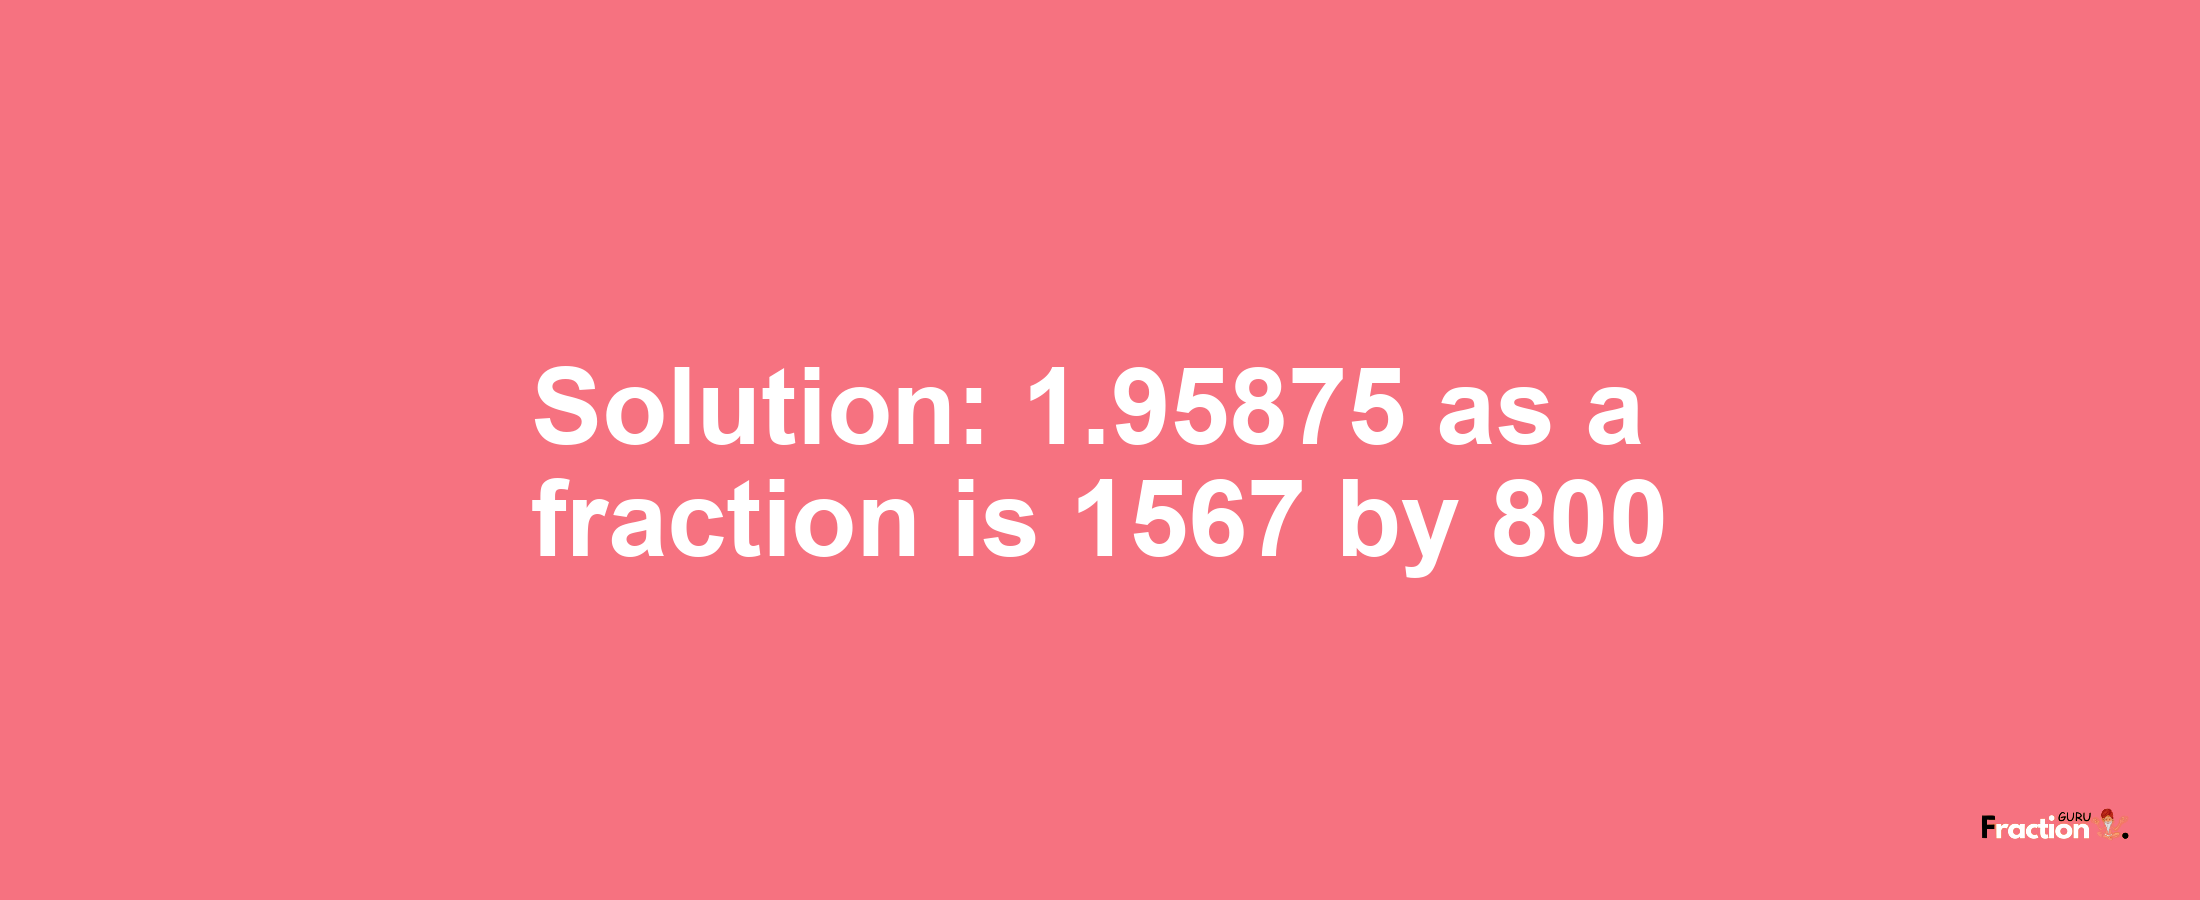 Solution:1.95875 as a fraction is 1567/800